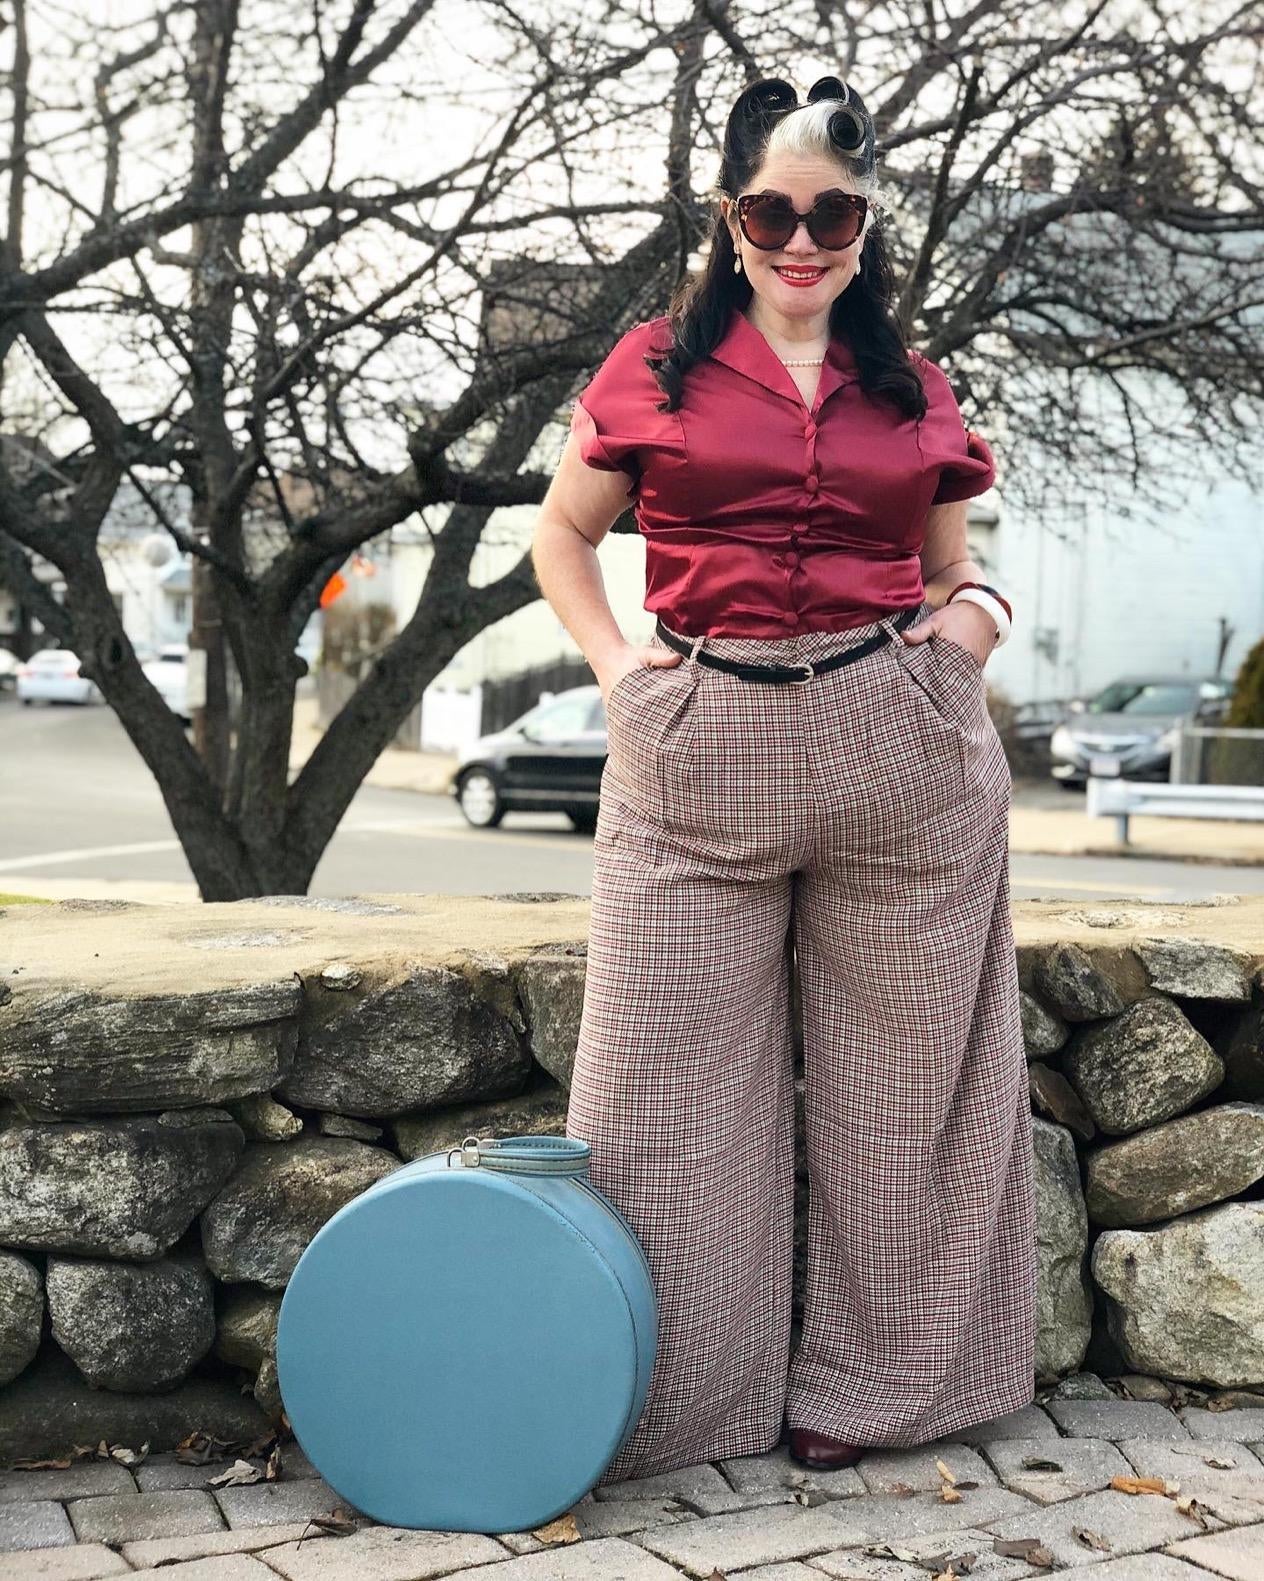 Style tips from the 40s - How to wear high waist trousers